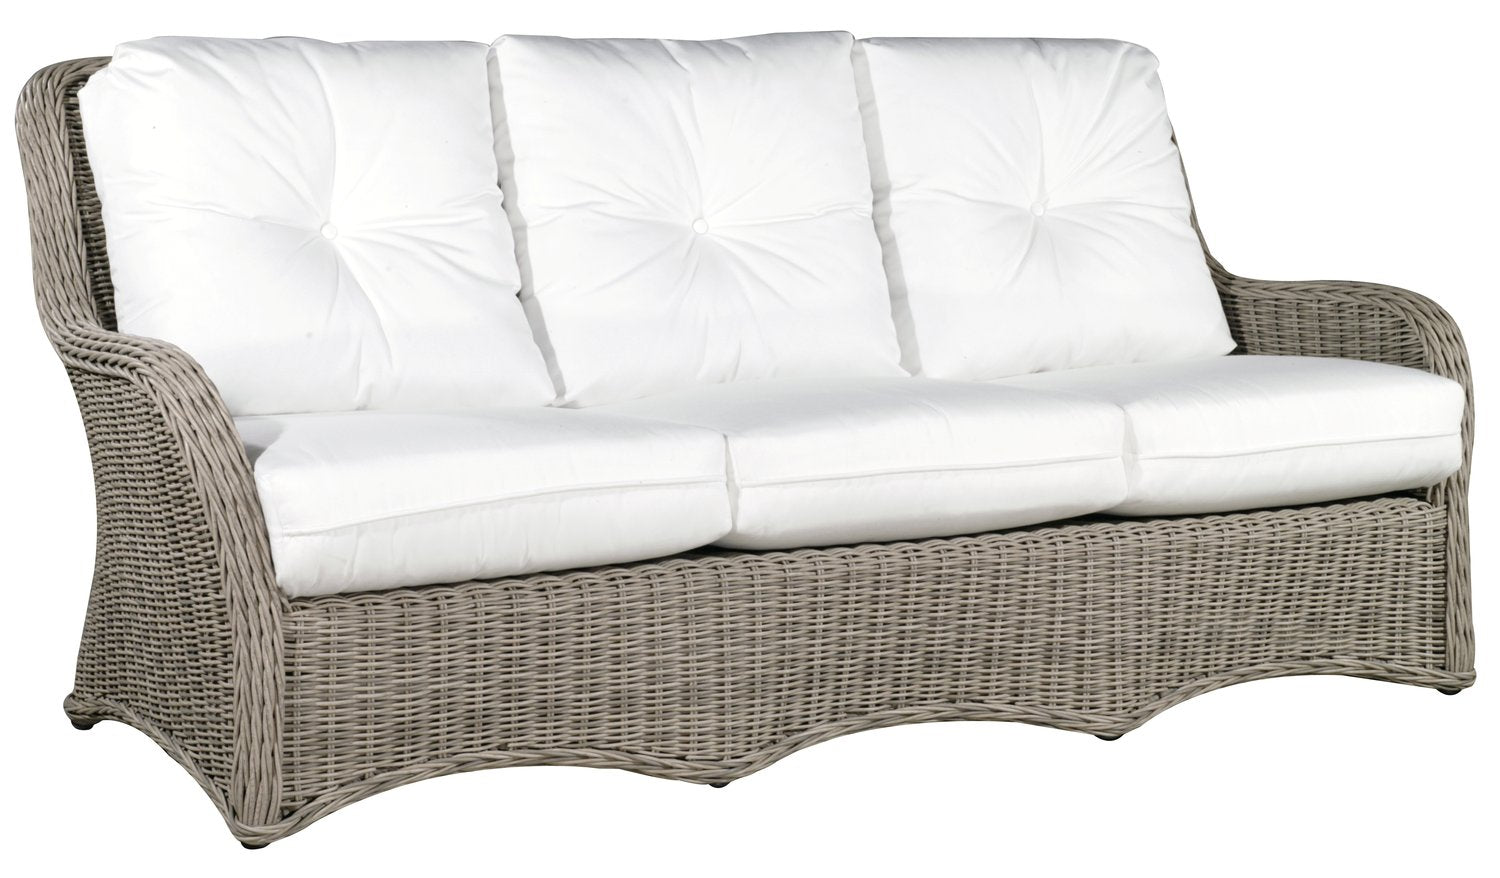 Shop Local Spokane Valley, WA for the best outdoor patio sofa from Patio Renaissance available at Jacobs Custom Living in Spokane Valley, WA 